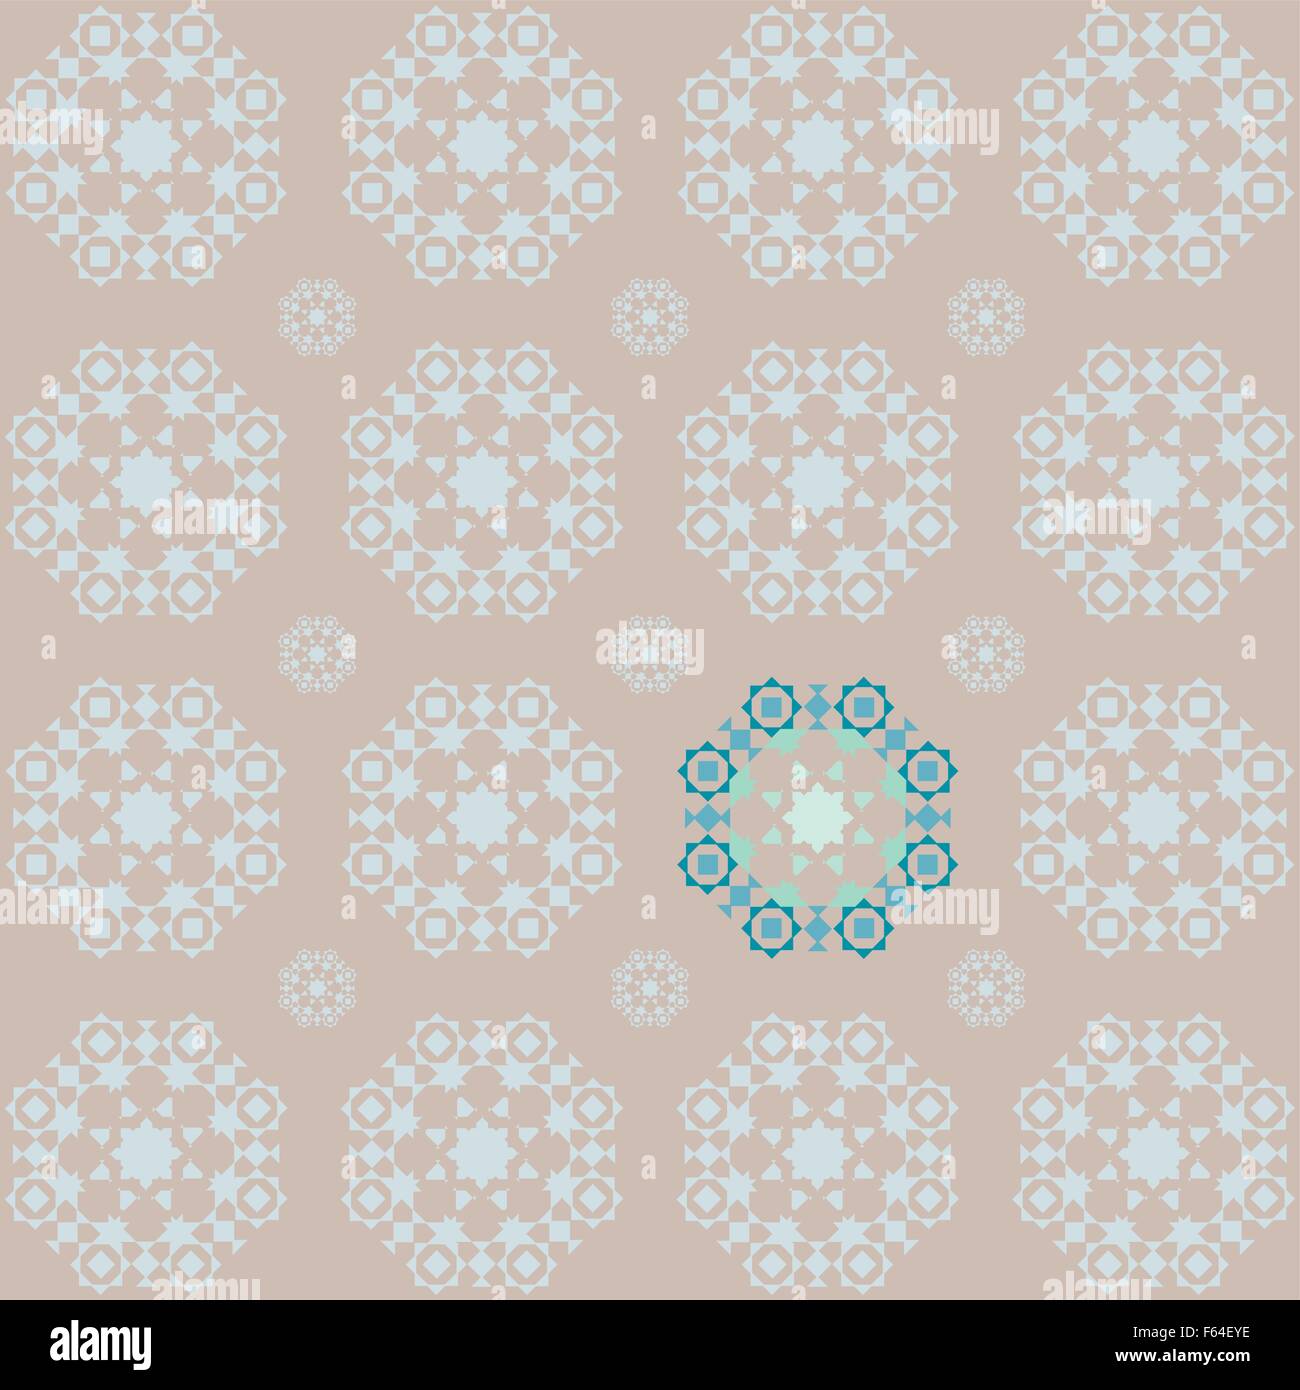 Retro snowflake style seamless wallpaper in brown and blue tones with a stand out section Stock Vector